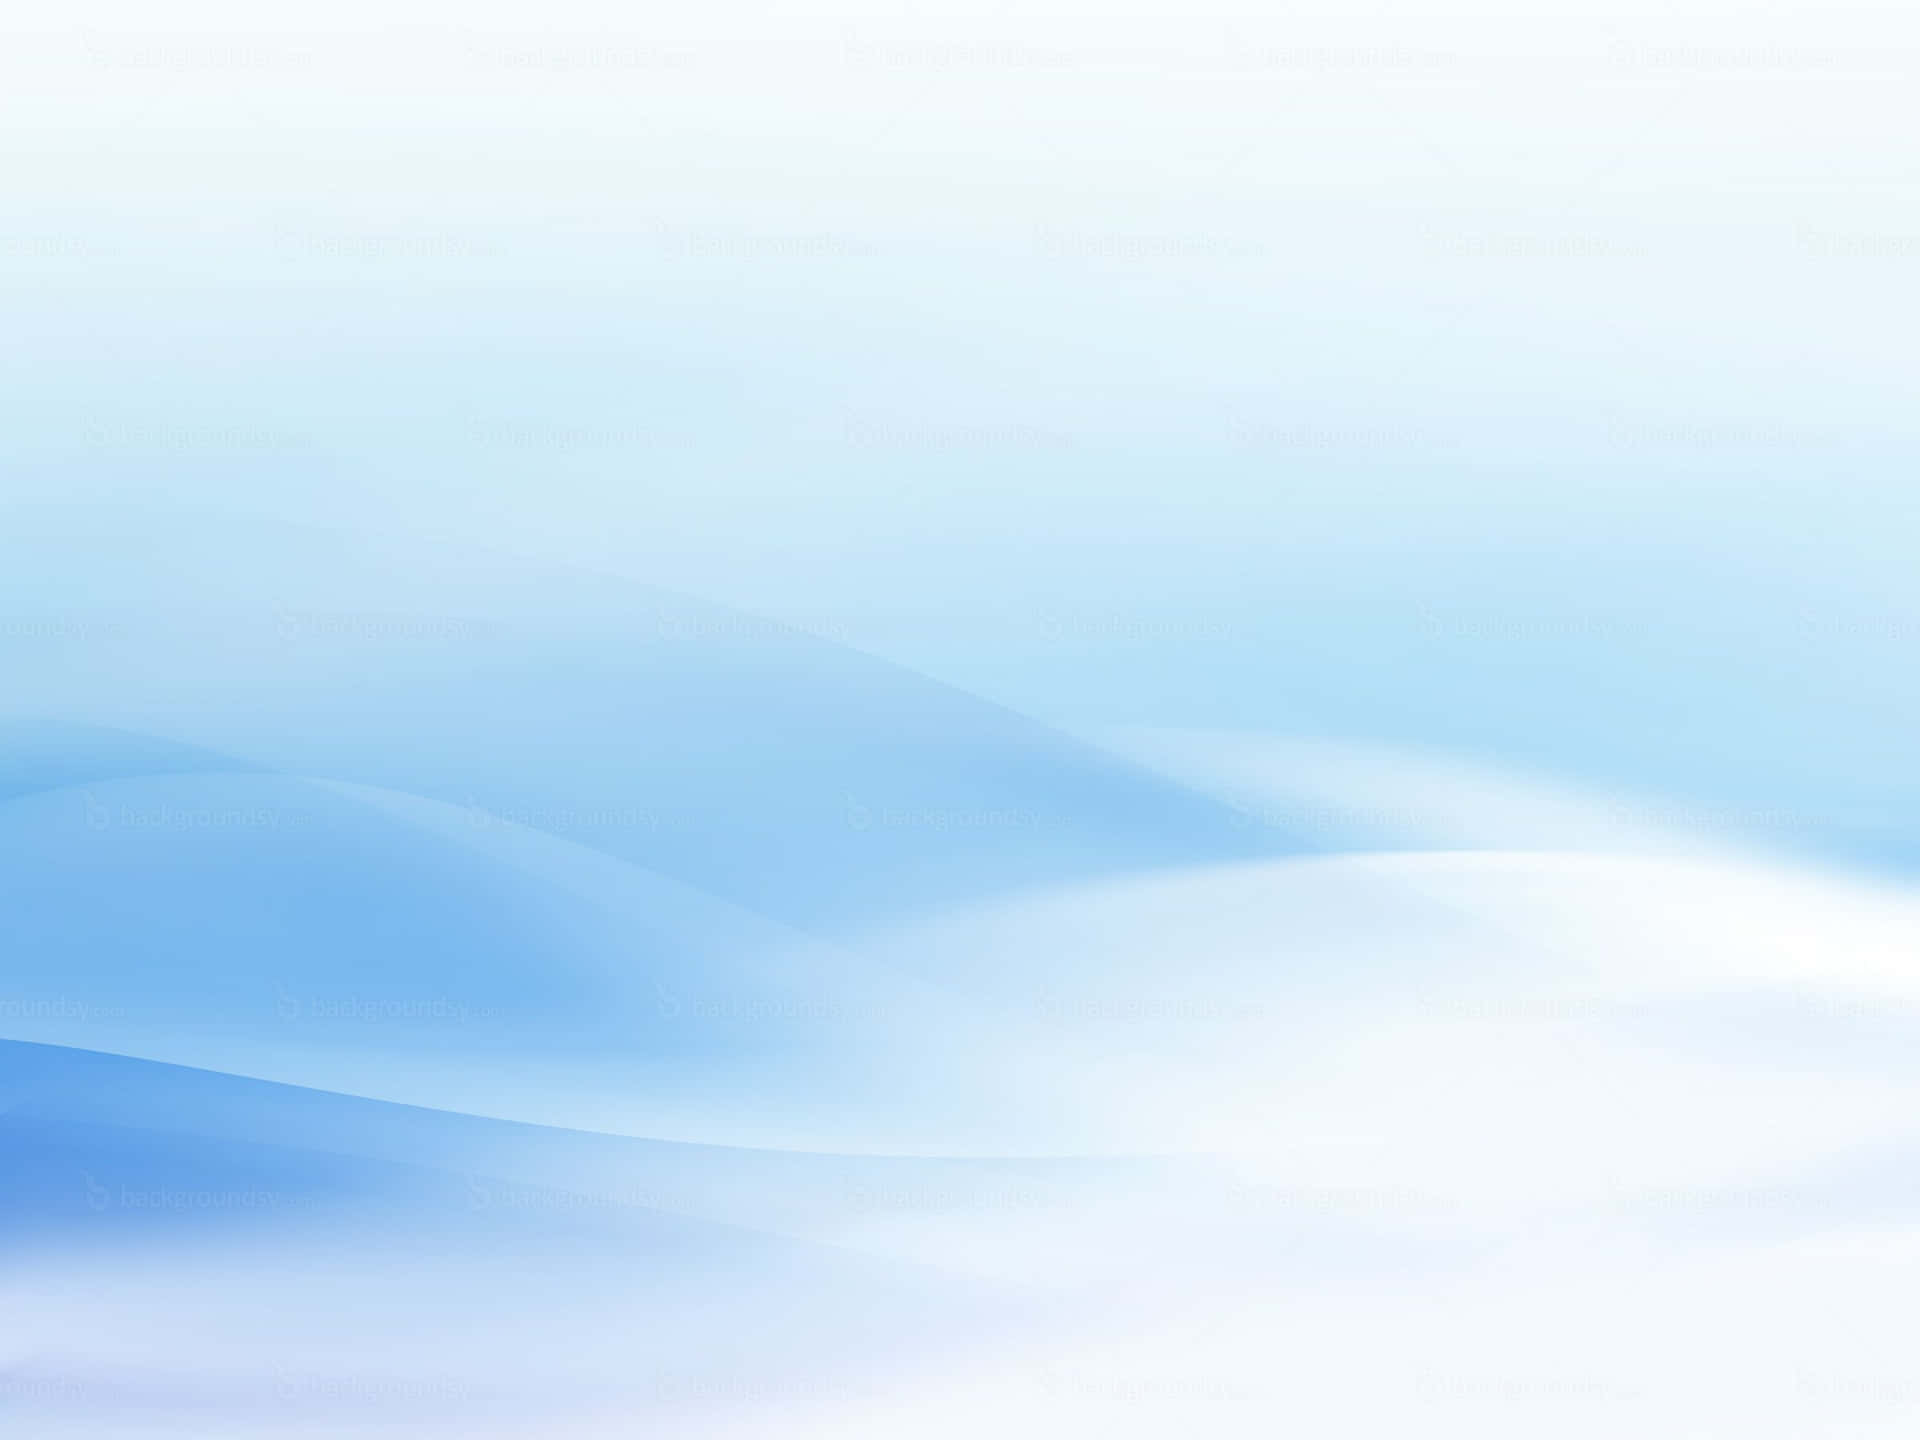 Blue And White Abstract Background